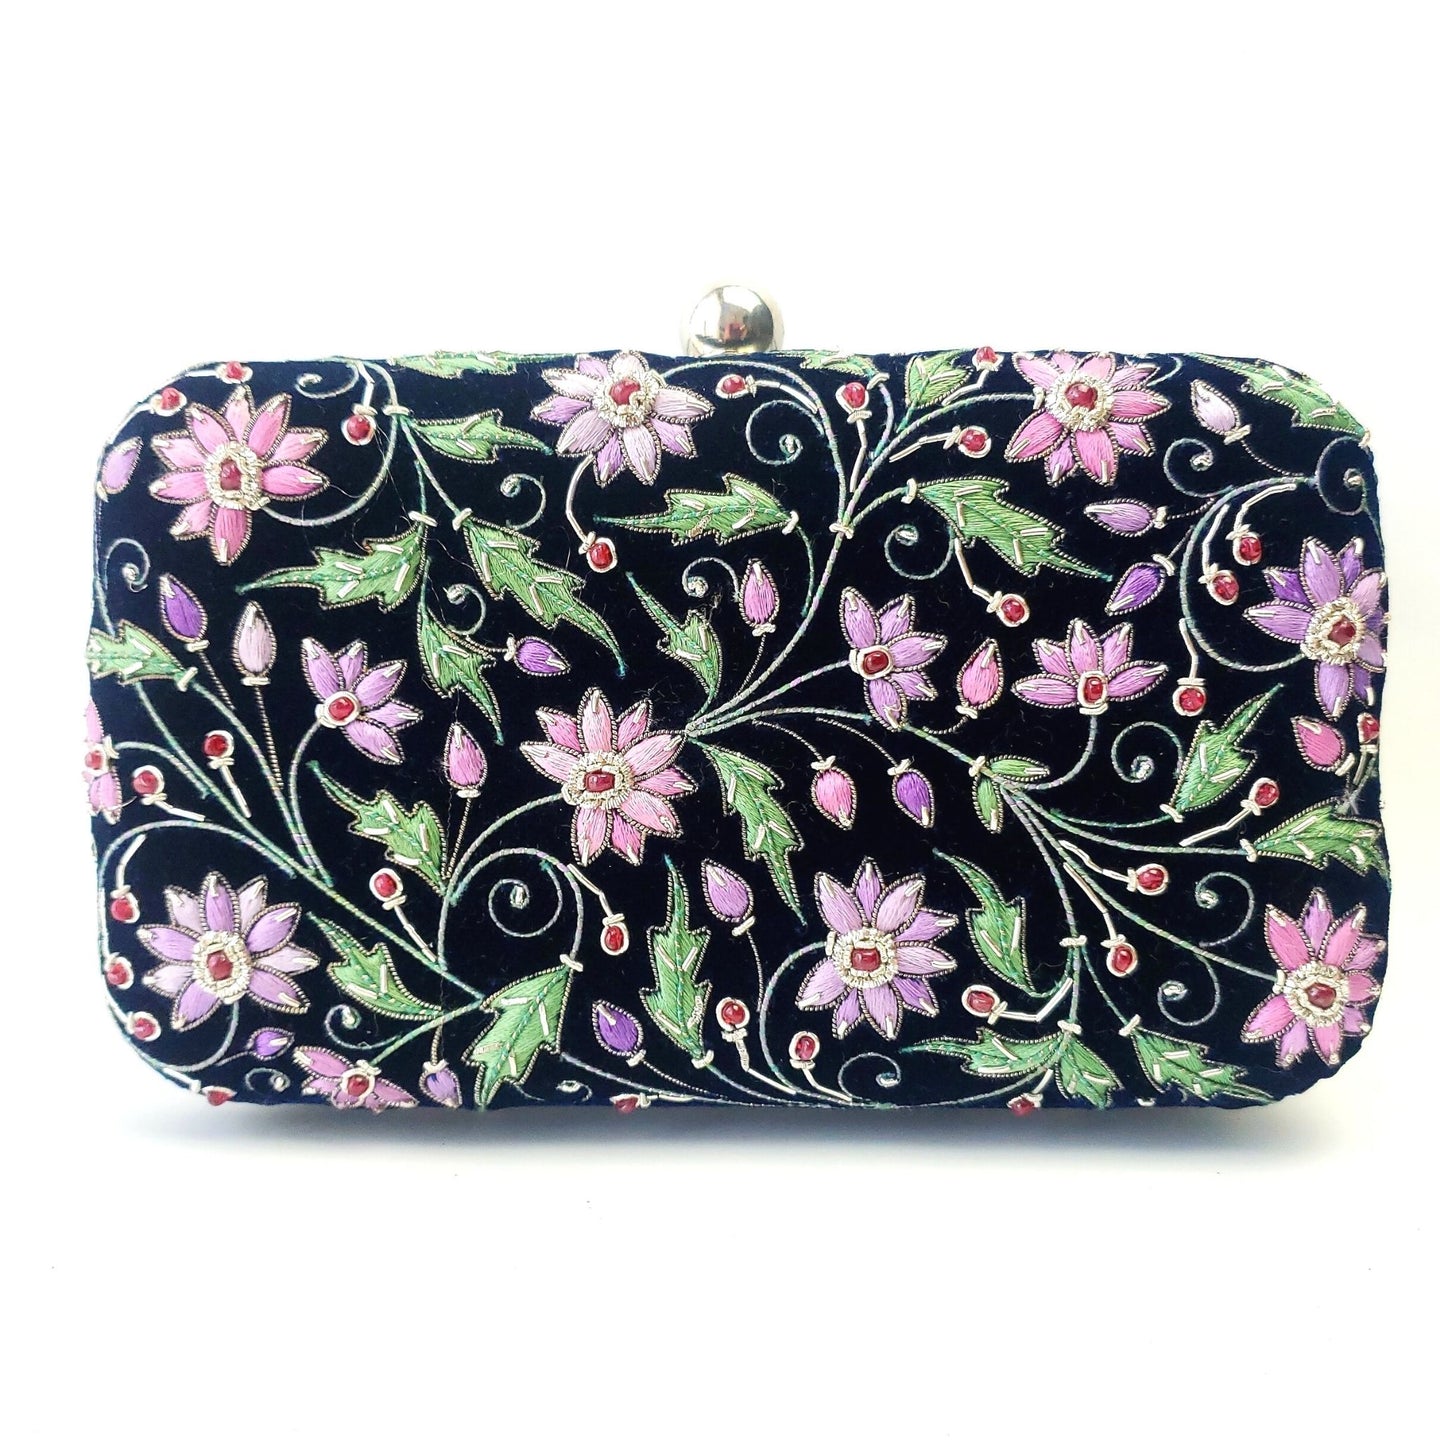 Luxury navy velvet clutch bag embroidered with lavender purple and silk flowers and embellished with rubies.